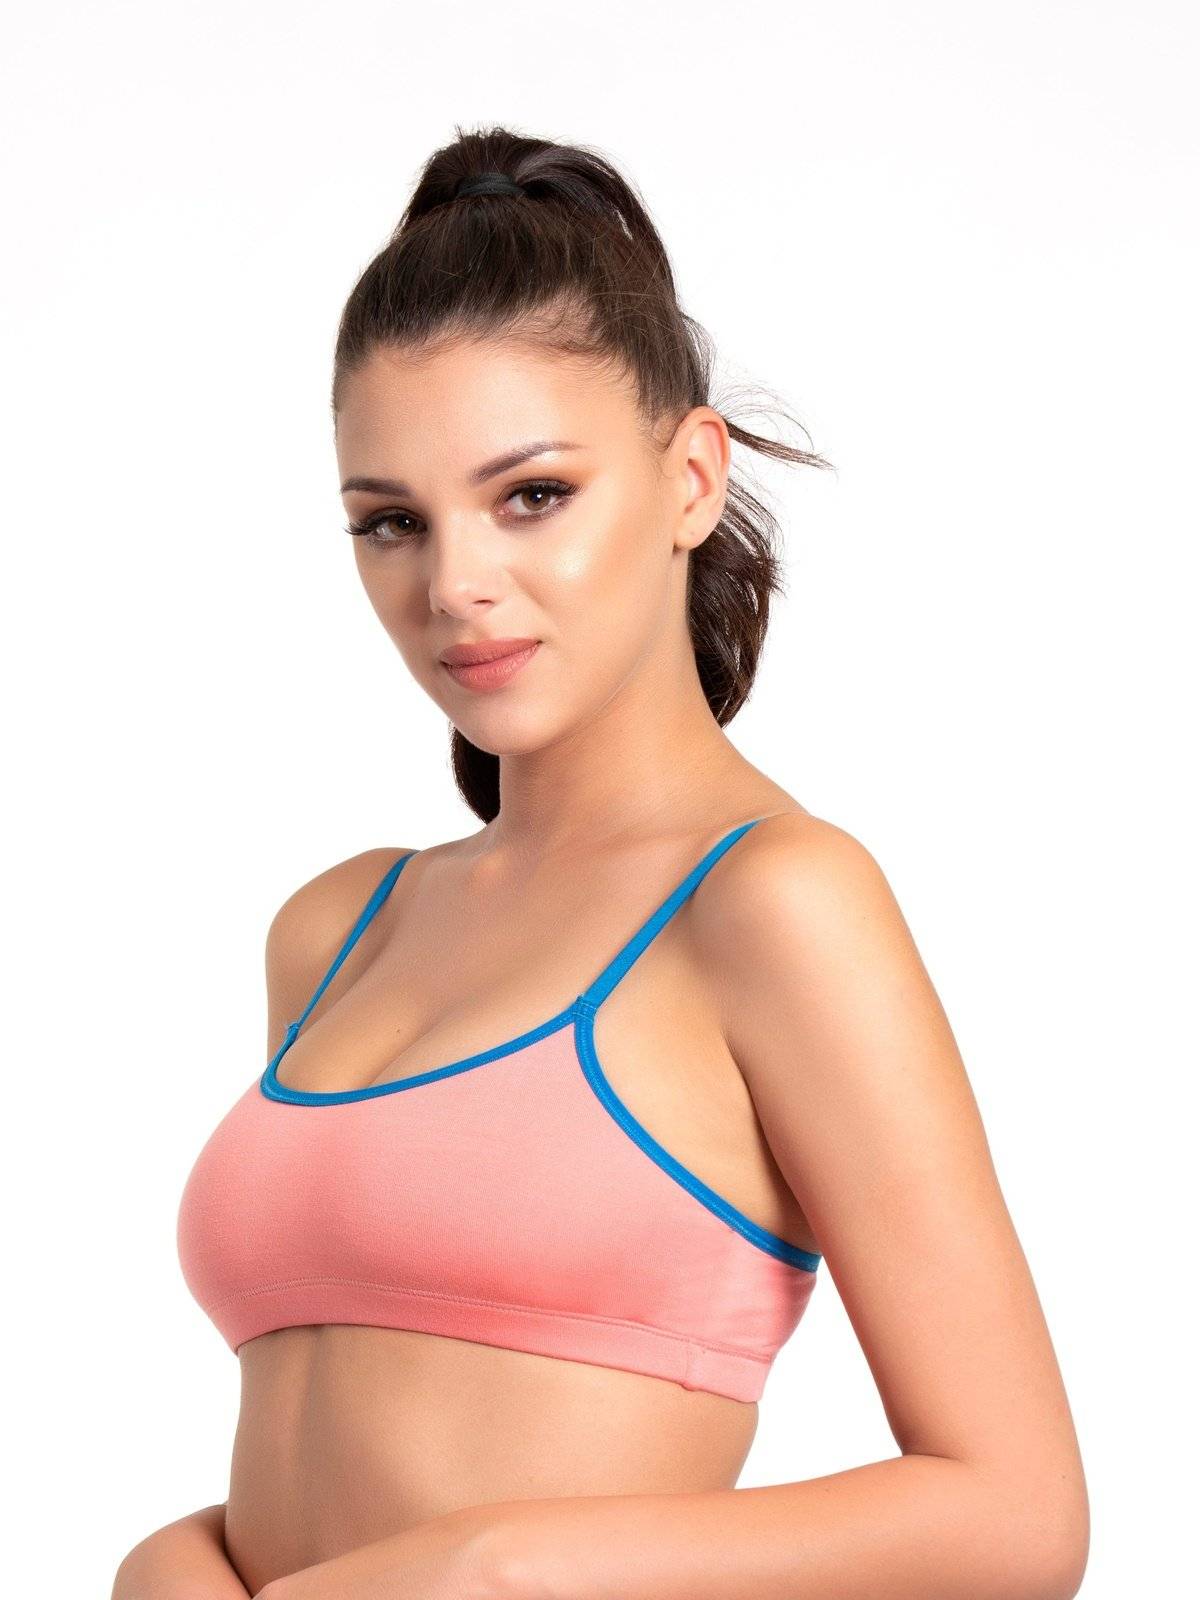 Envie Beginners bra, Teenage bra, Non Wired, Super Soft fabric for soft touch comfort